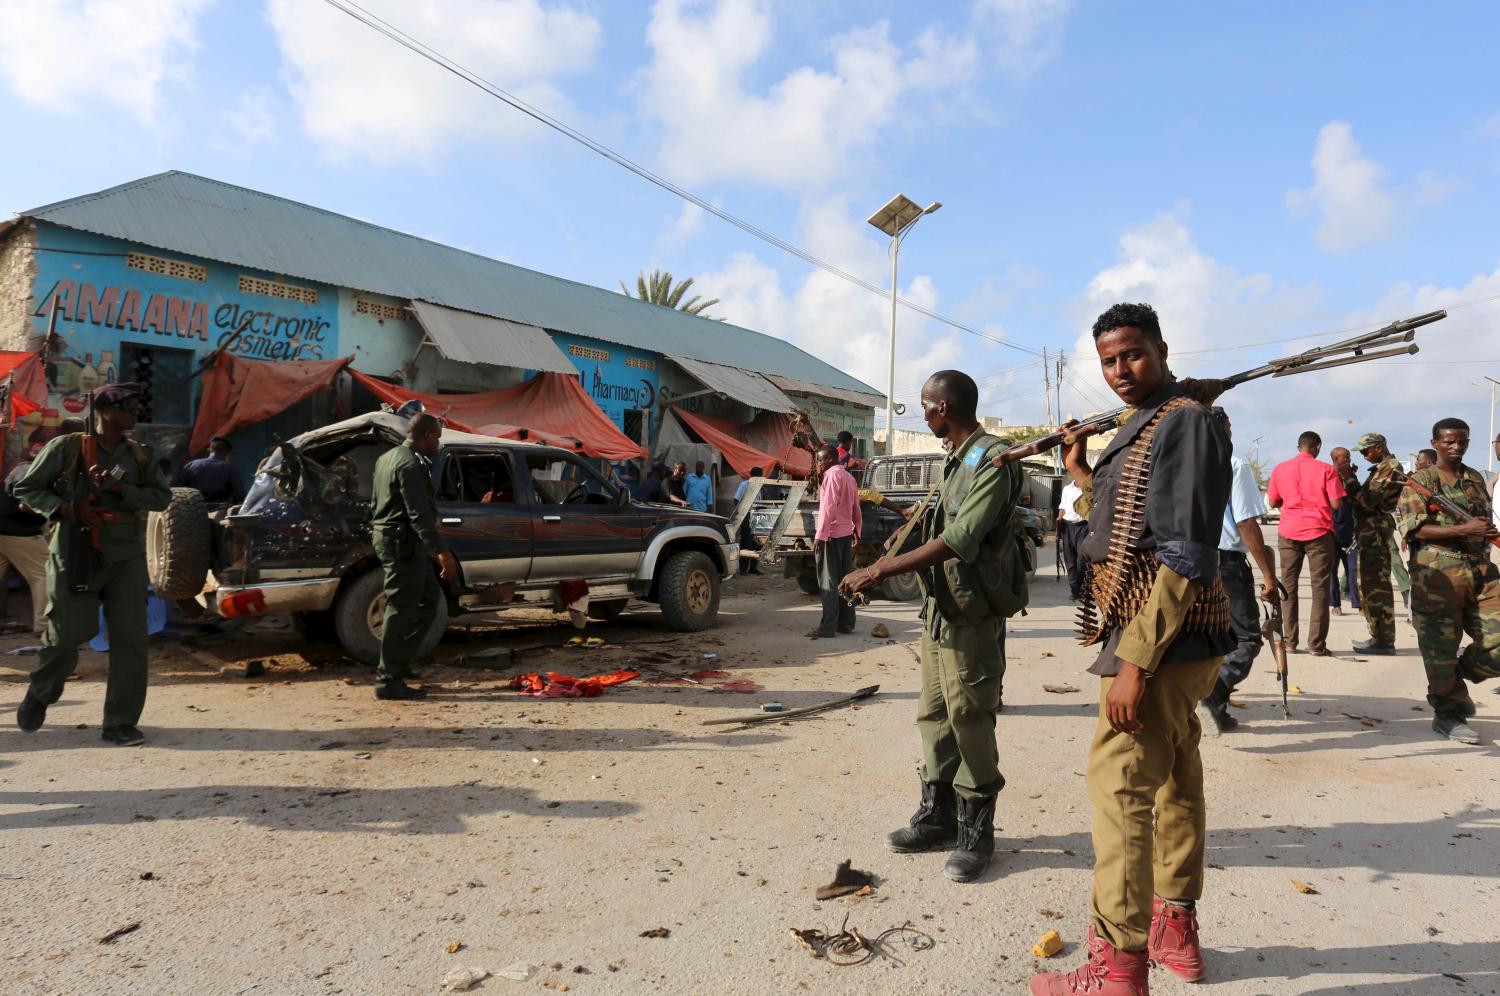 Somali policemen gather near the wreckage of a car at the scene of an explosion following an attack in Somalia's capital Mogadishu, March 9, 2016. Islamist group al Shabaab said it fought off an attack on one of its bases in southern Somalia early on Wednesday that was launched by foreign commandos who flew in on two helicopters, leaving one al Shabaab fighter dead in the gun battle. REUTERS/Feisal Omar